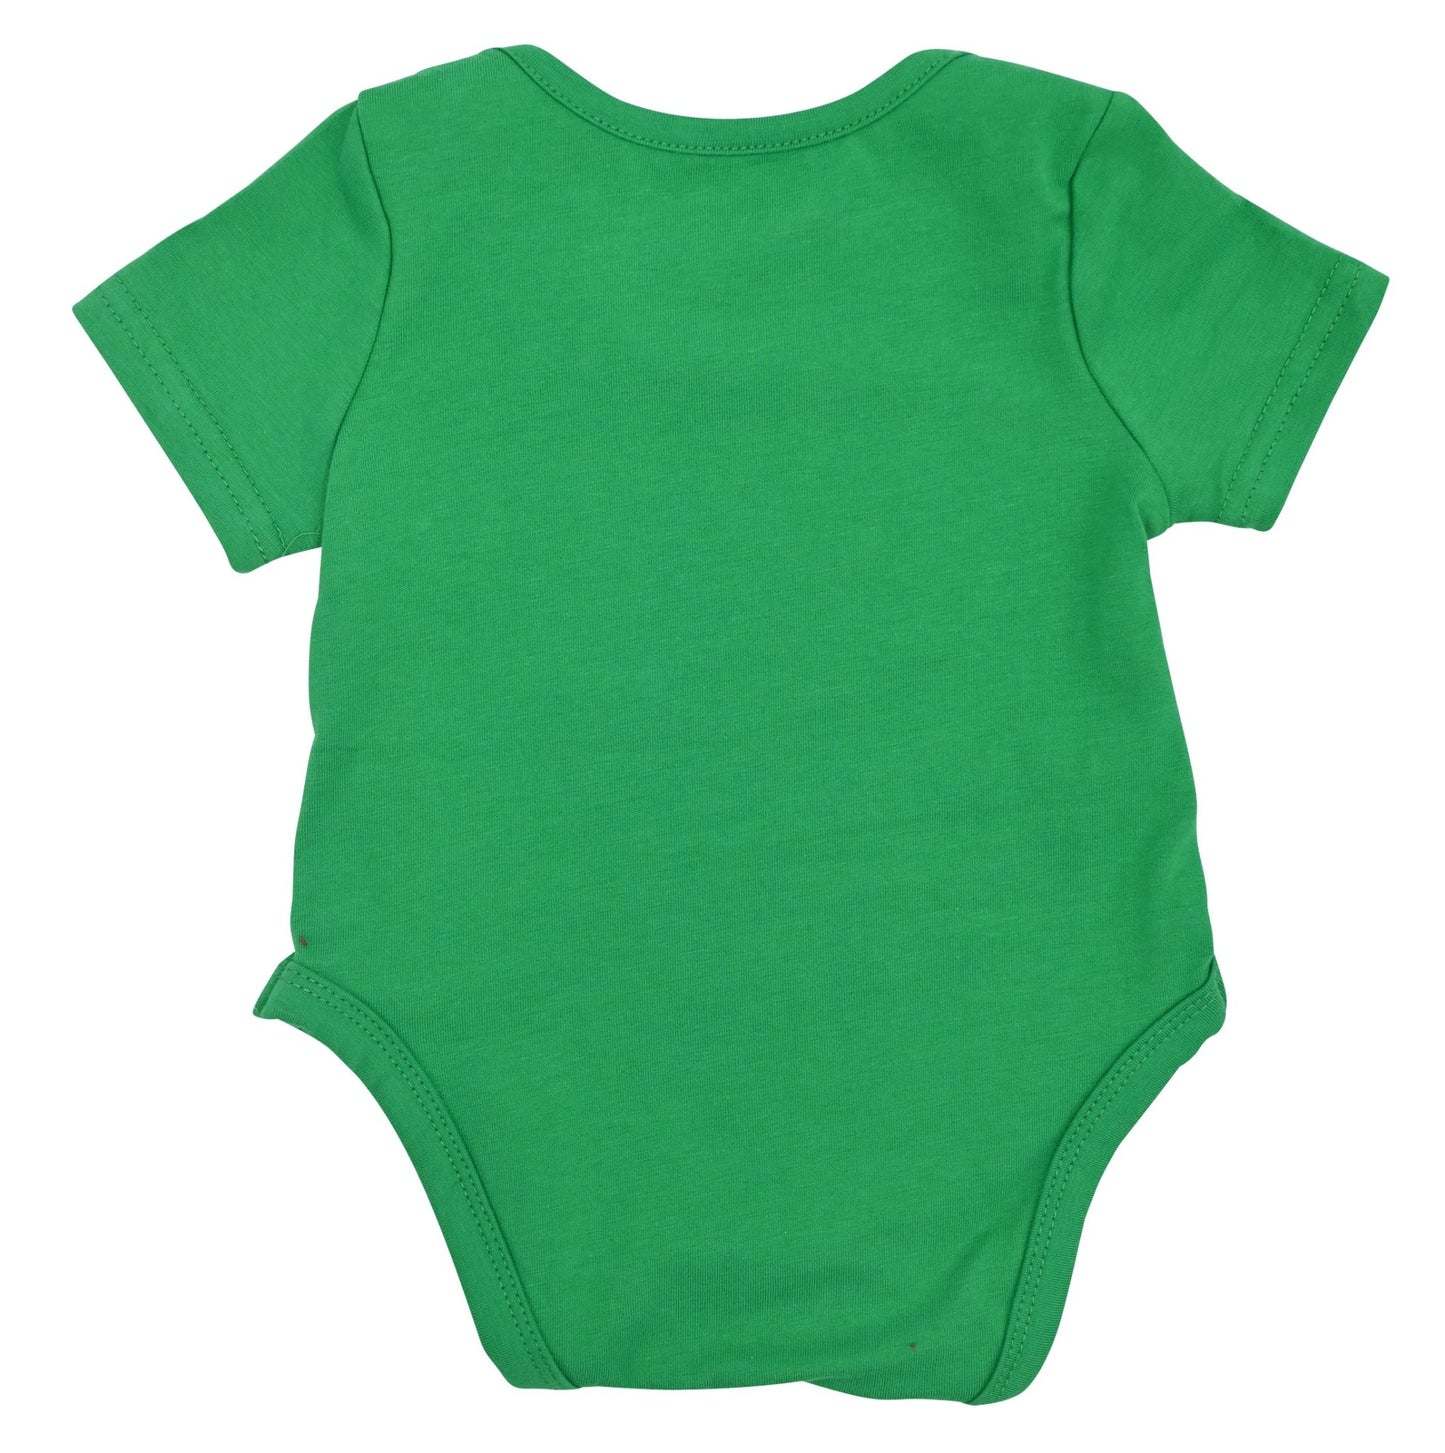 Infant 'Mistletoe Not Required' Outfit Set - Green Onesie with Christmas Tree Pants - Sizes NB to 24M - Unique Baby Shop - Christmas